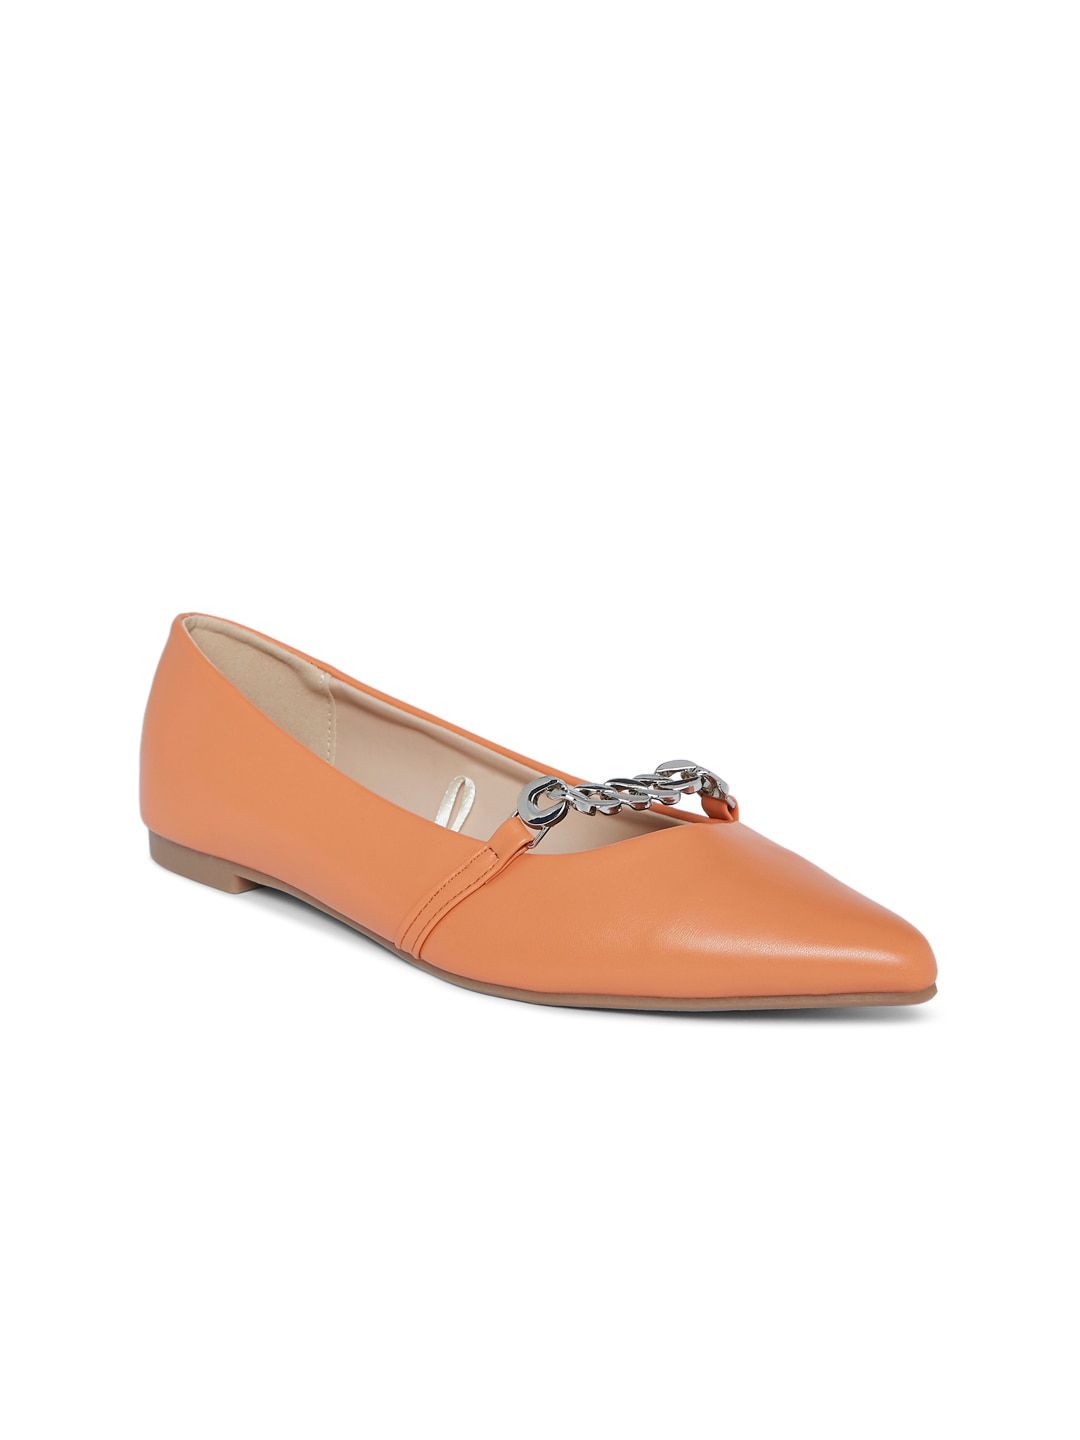 Forever Glam by Pantaloons Coral Solid Ballerina Shoes Price in India